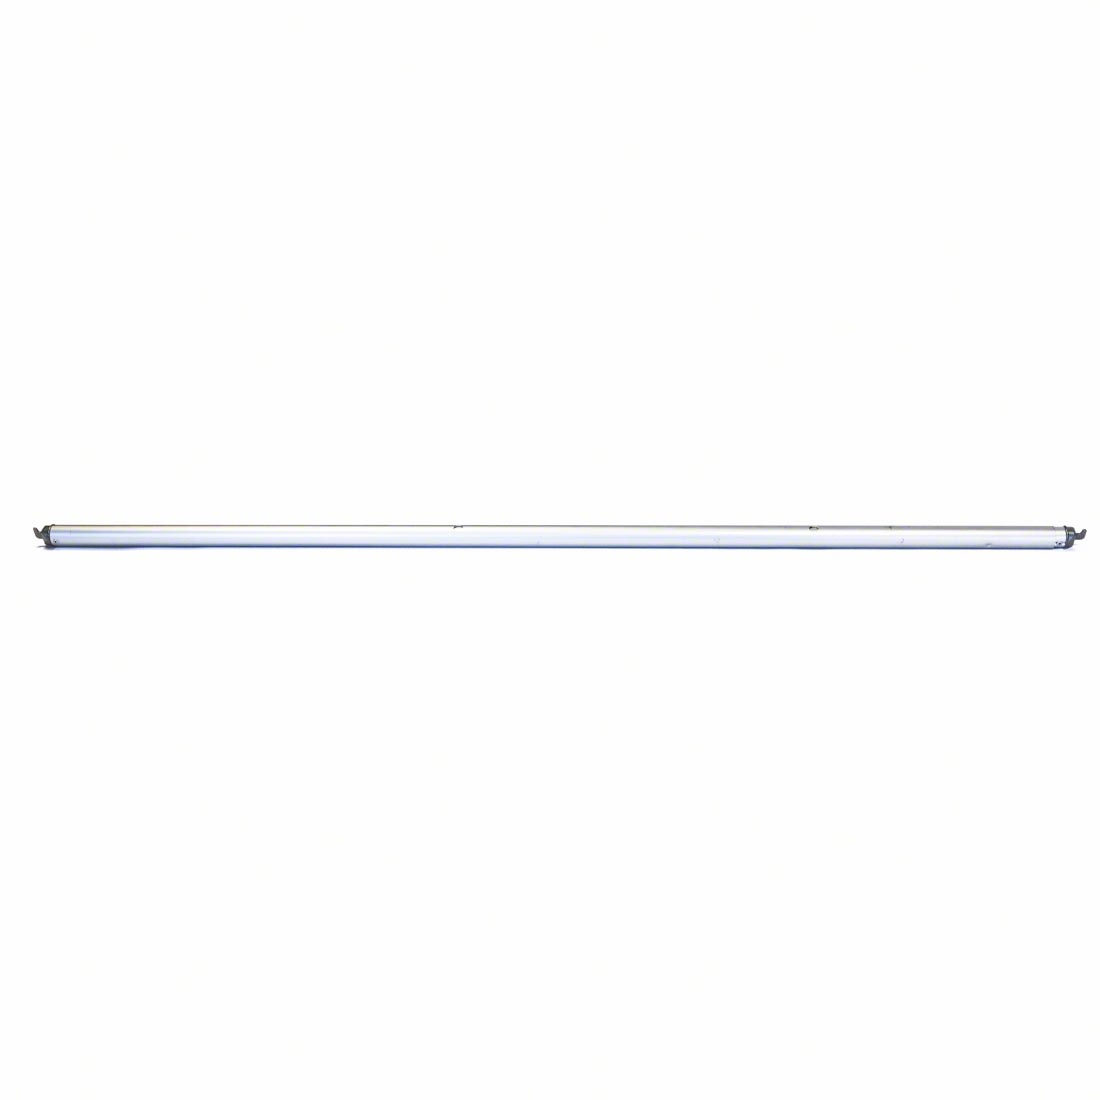 adjustable aluminum crossbar for pipe and drape that extends from 6 feet to 10 feet